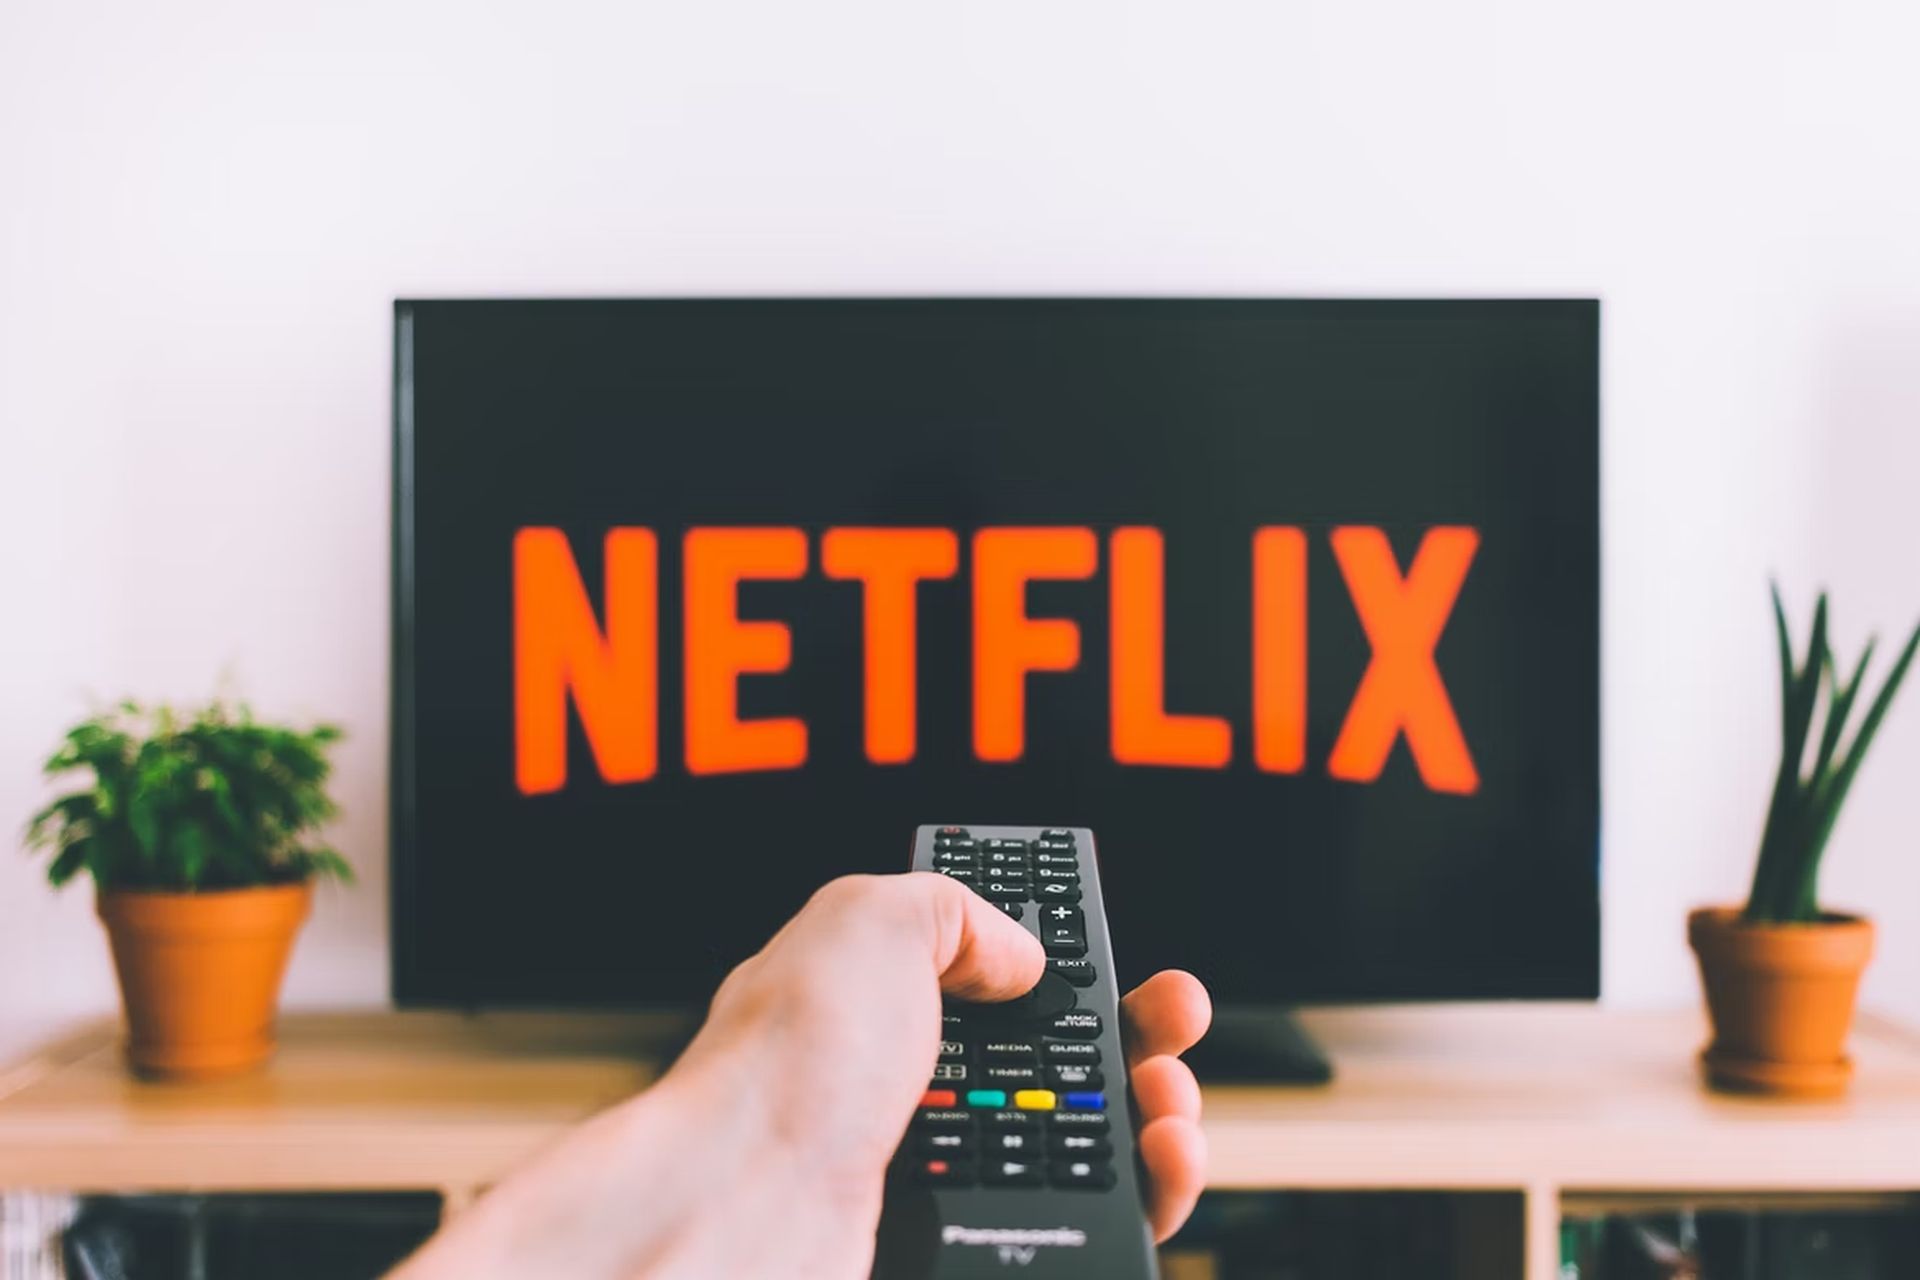 Today we are here to show you how to fix Netflix error code NW-2-5. What is it, and what causes this issue?